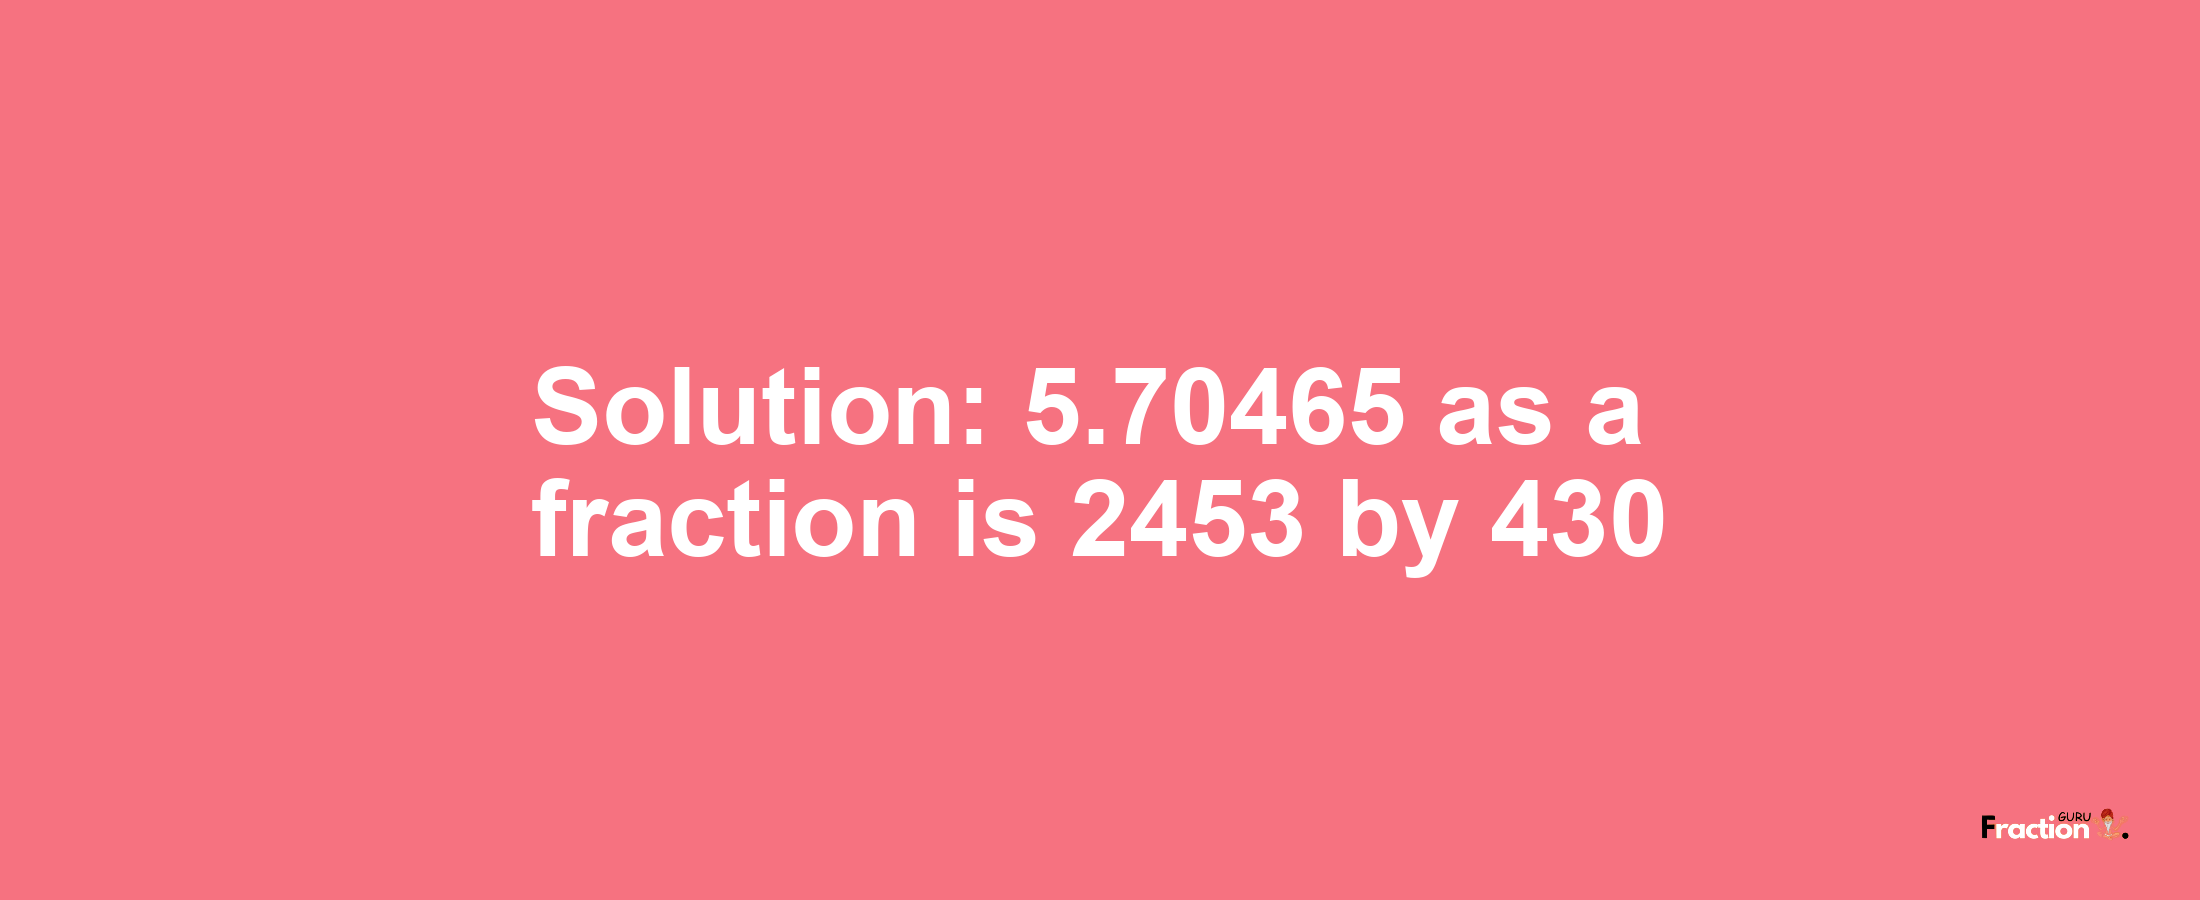 Solution:5.70465 as a fraction is 2453/430